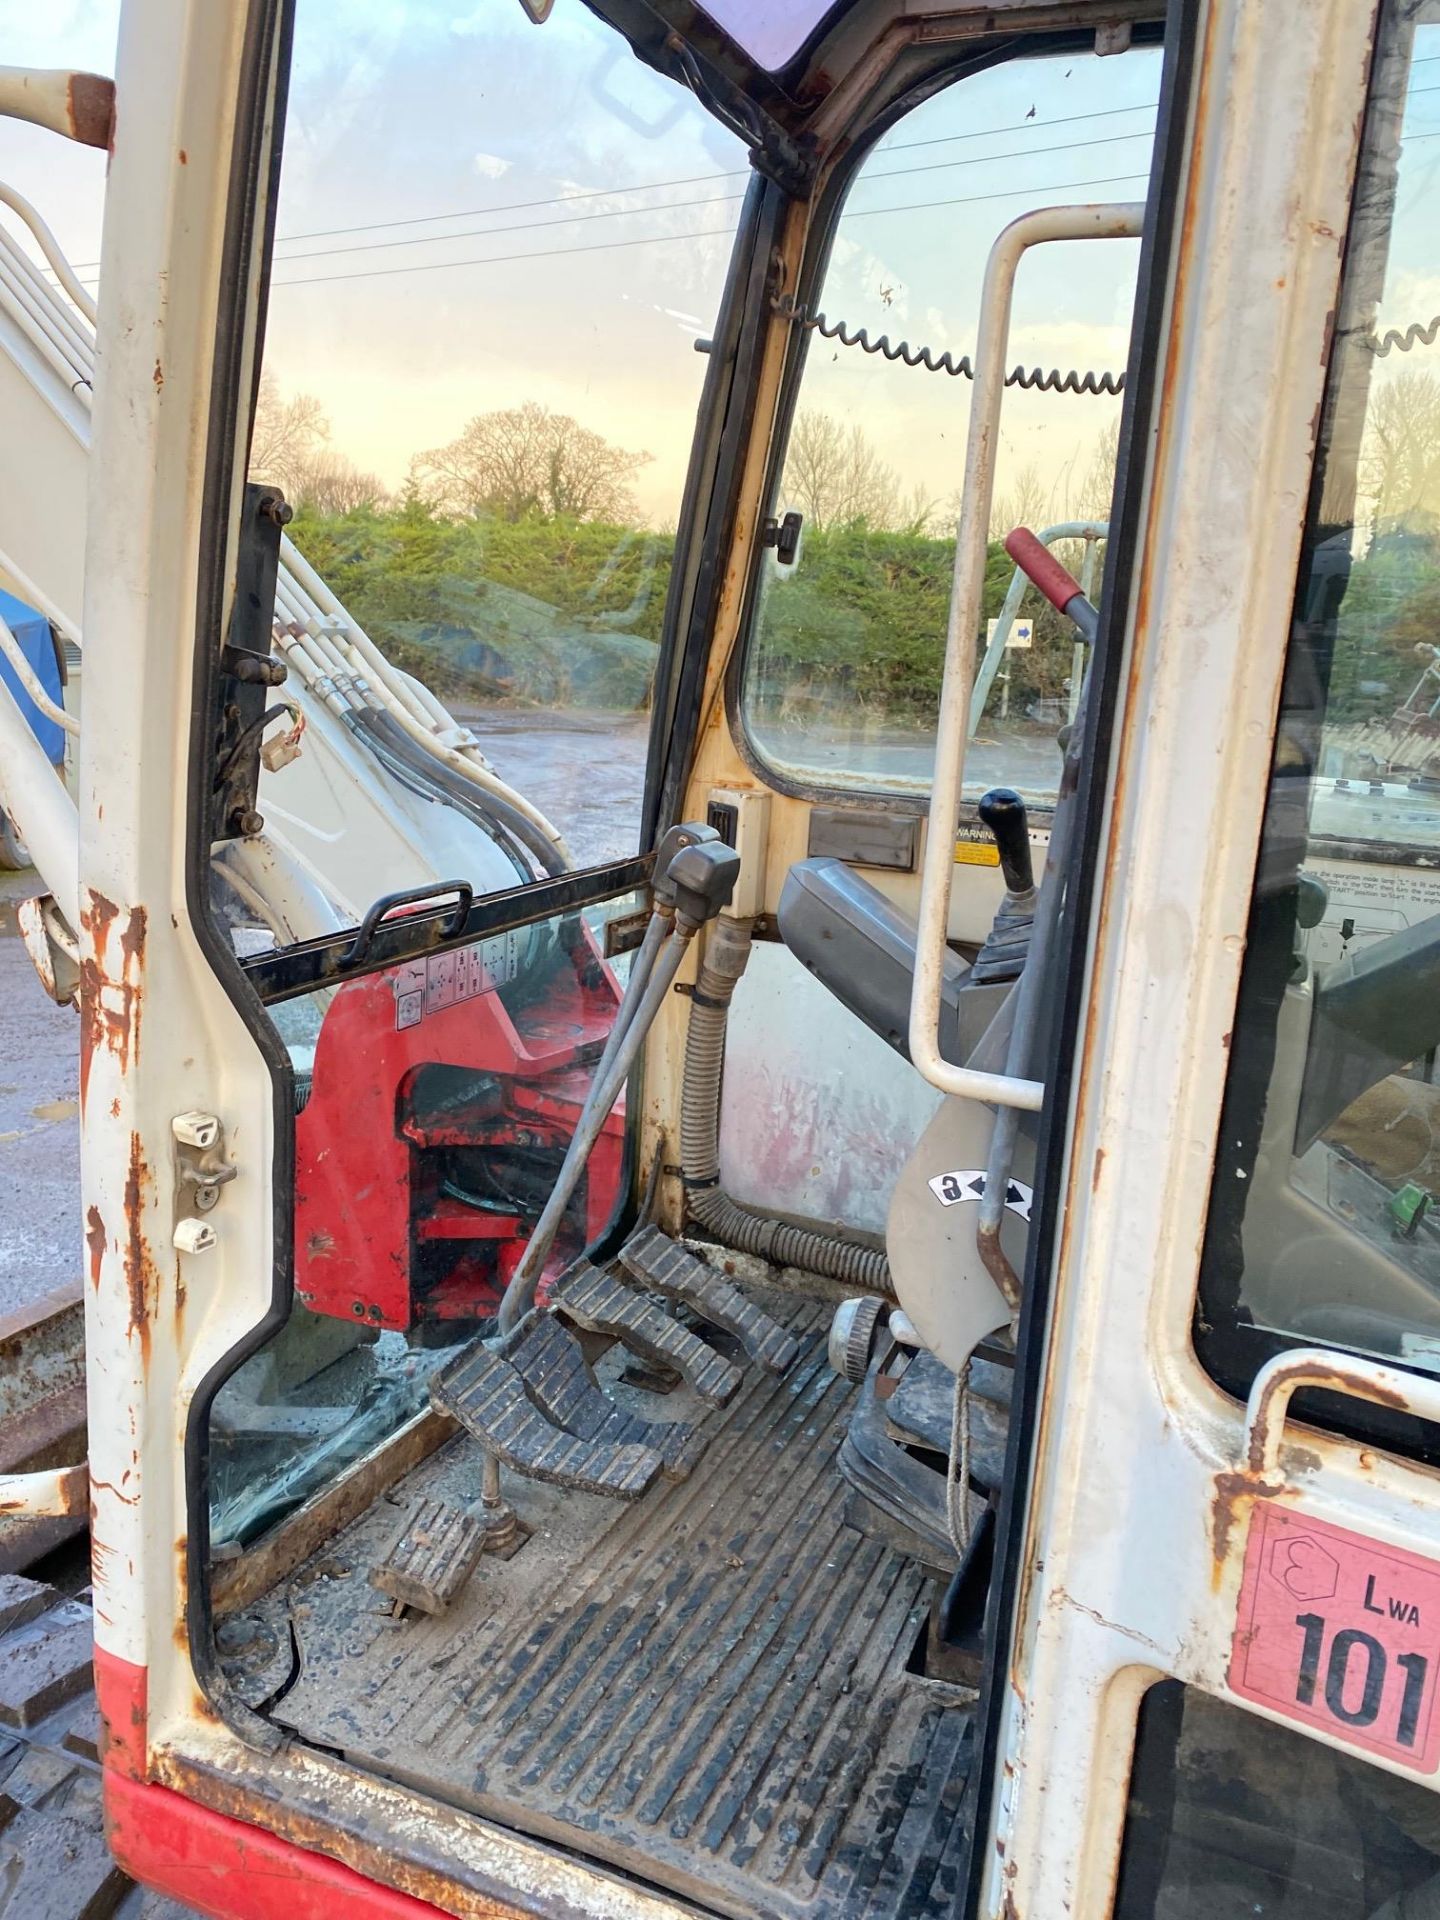 99 TAKEUCHI TB070 TON EXCAVATOR, 4500 HOURS, RECENT NEW TRACKS, STARTS AND RUNS WELL *PLUS VAT* - Image 6 of 7